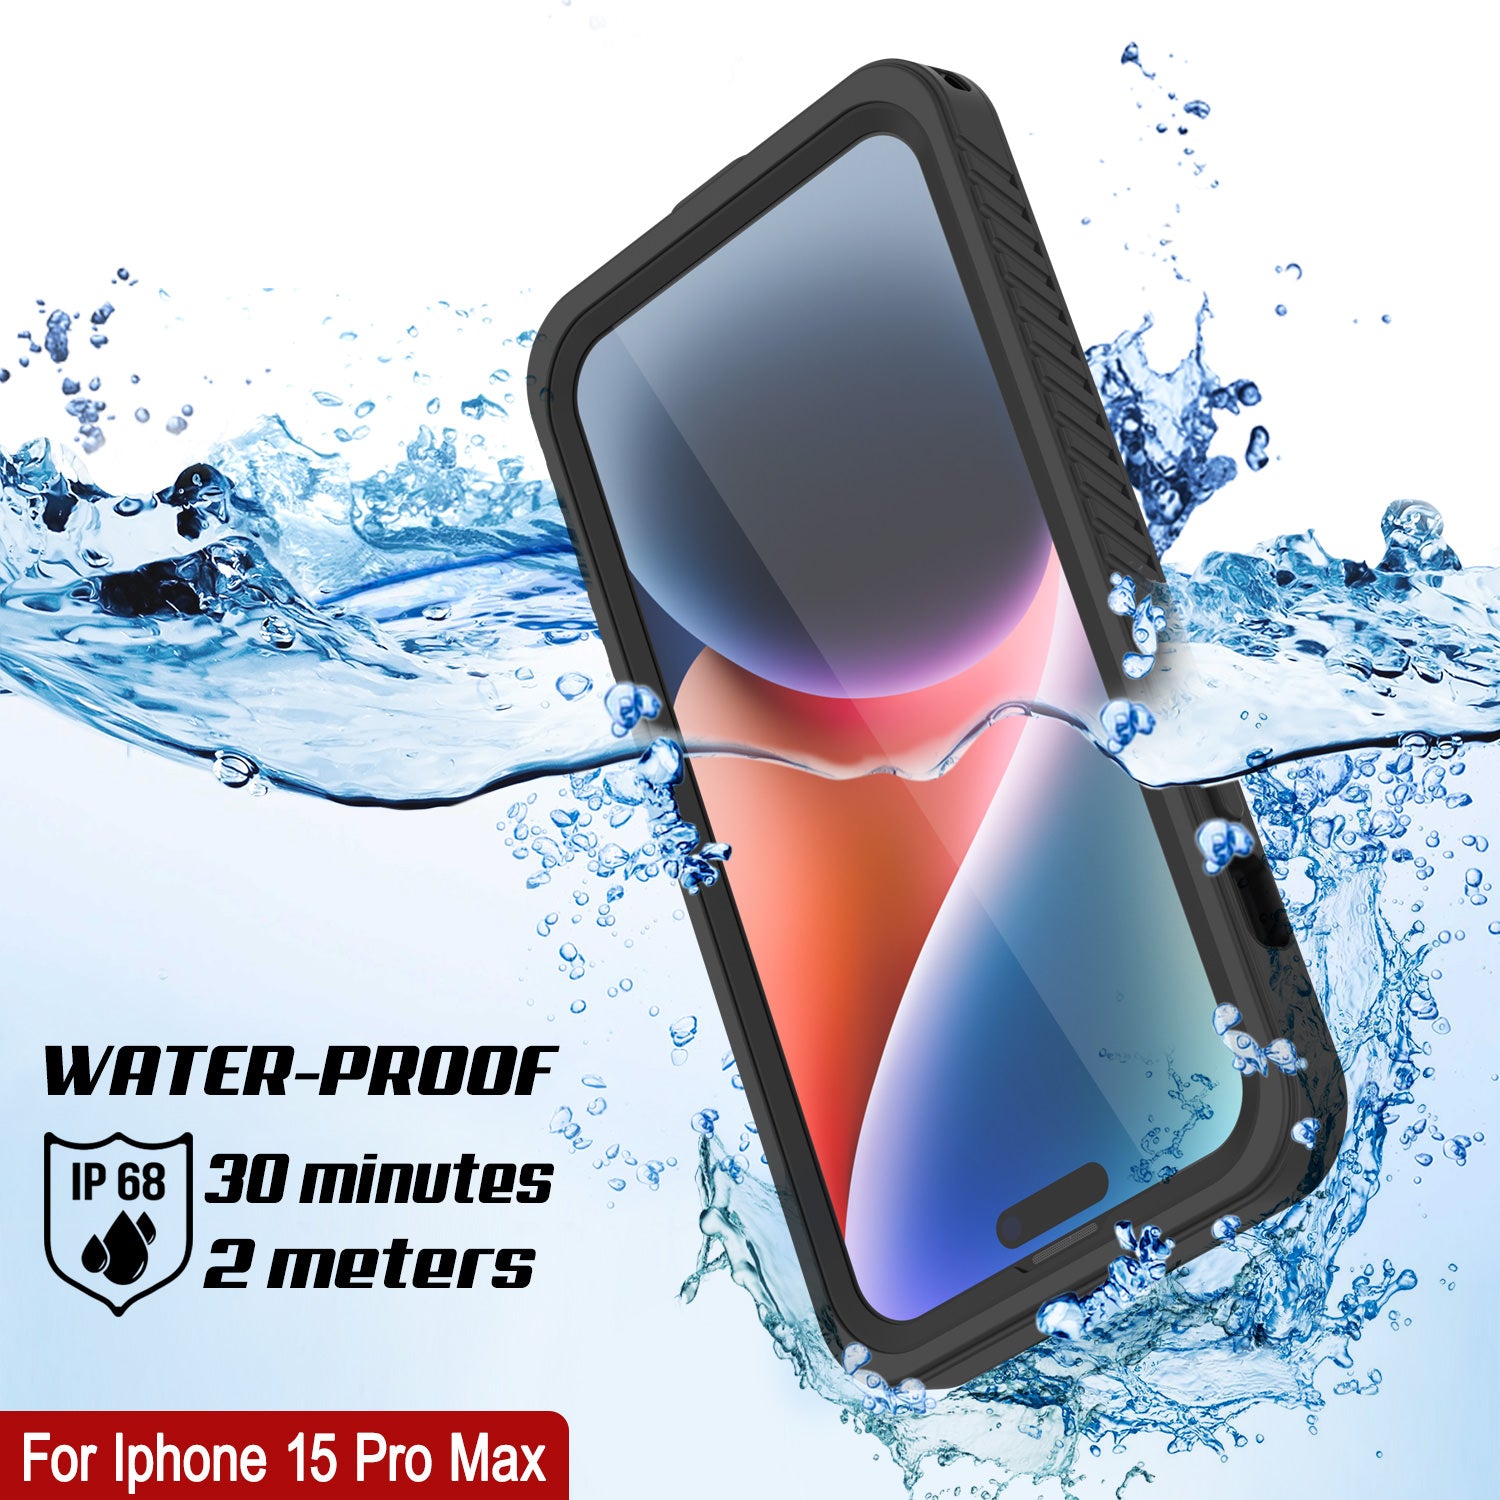 https://www.punkcase.com/cdn/shop/files/iphone-15-pro-max-waterproof-case-punkcase-extreme-series-slim-fit-ip68-certified-shockproof-snowproof-dirtproof-military-grade-rugged-innovative-design-armor-cover-w-built-in-screen_0ef19a7f-7b45-4560-b1f7-1c4b63c89596.jpg?v=1694543176